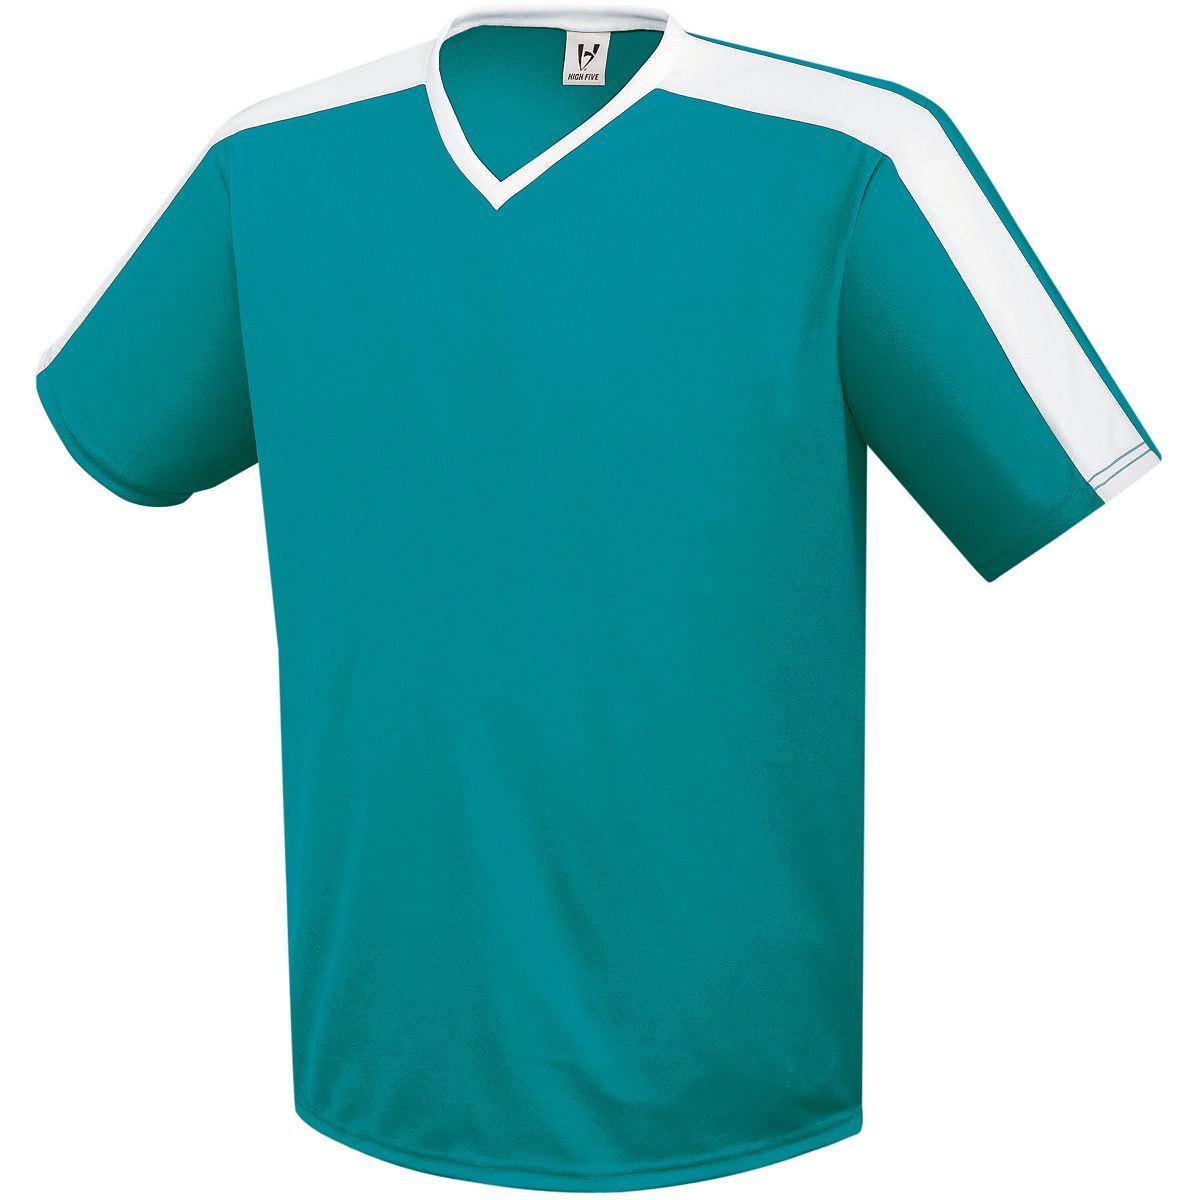 High 5 Youth Genesis Soccer Jersey in Teal/White  -Part of the Youth, Youth-Jersey, High5-Products, Soccer, Shirts, All-Sports-1 product lines at KanaleyCreations.com